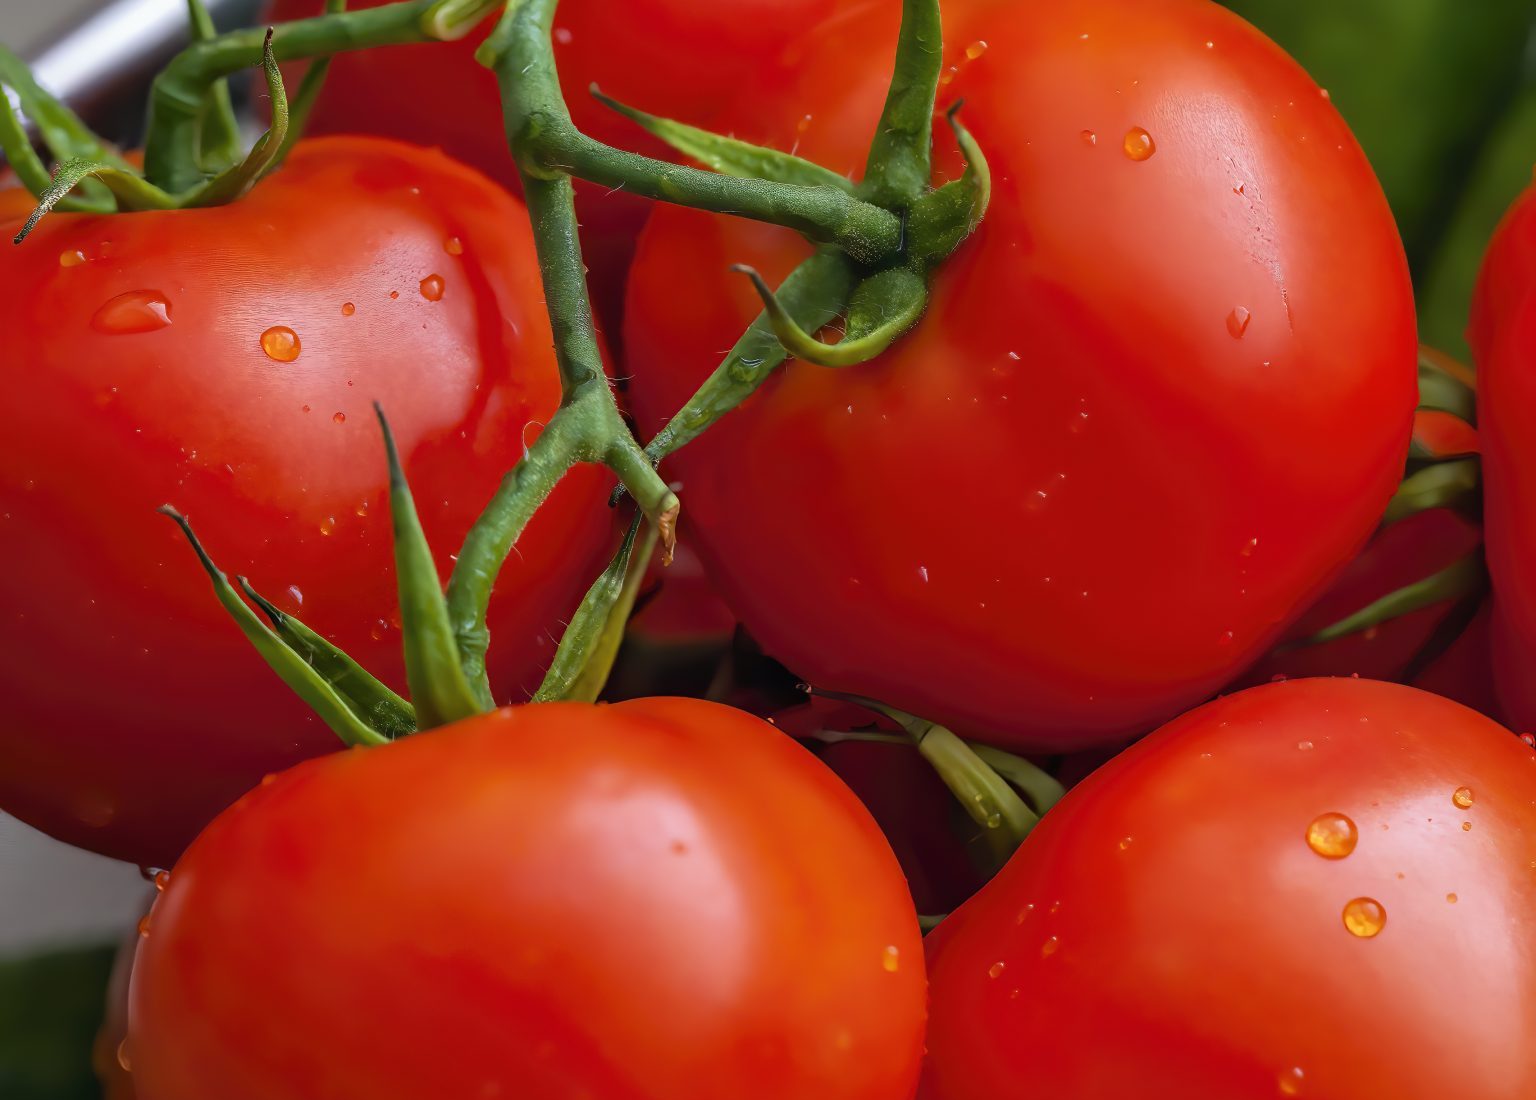 Get Ready for a New Season of Gardening -Choose from Tomatoes, Peaches, Corn, Zinnias & More!